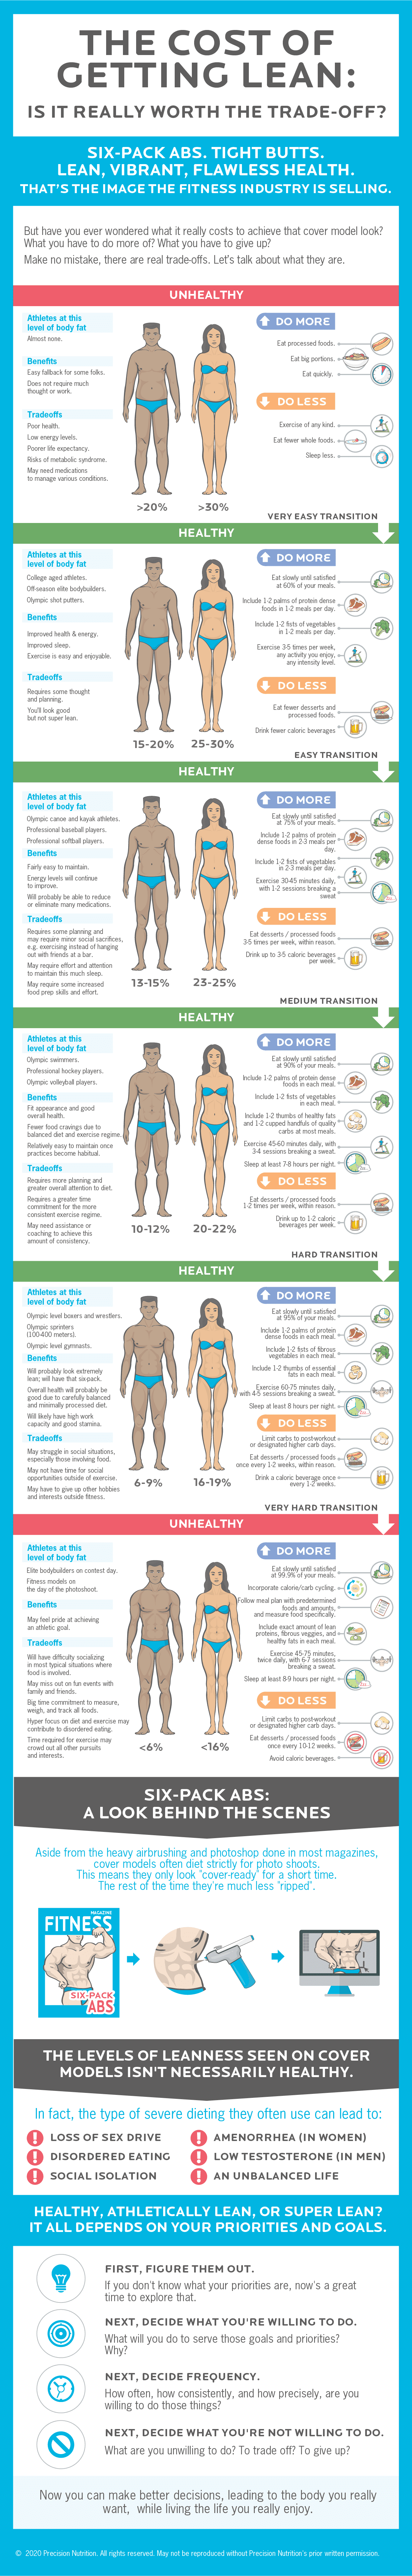 https://assets.precisionnutrition.com/2018/08/cost-of-getting-lean-infographic-image.png